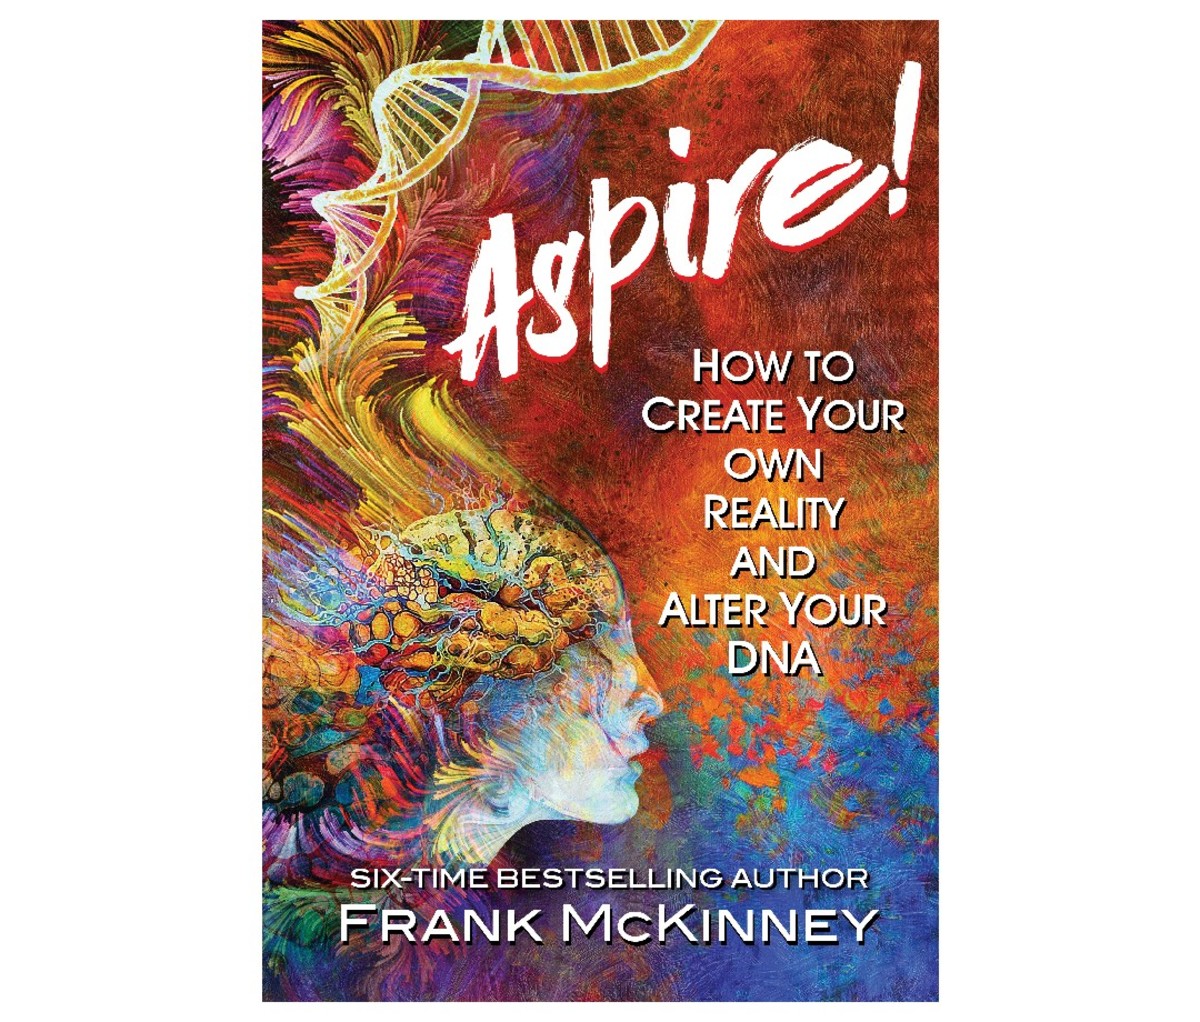 Aspire !: How to Create Your Own Reality and Change Your DNA by Frank McKinney